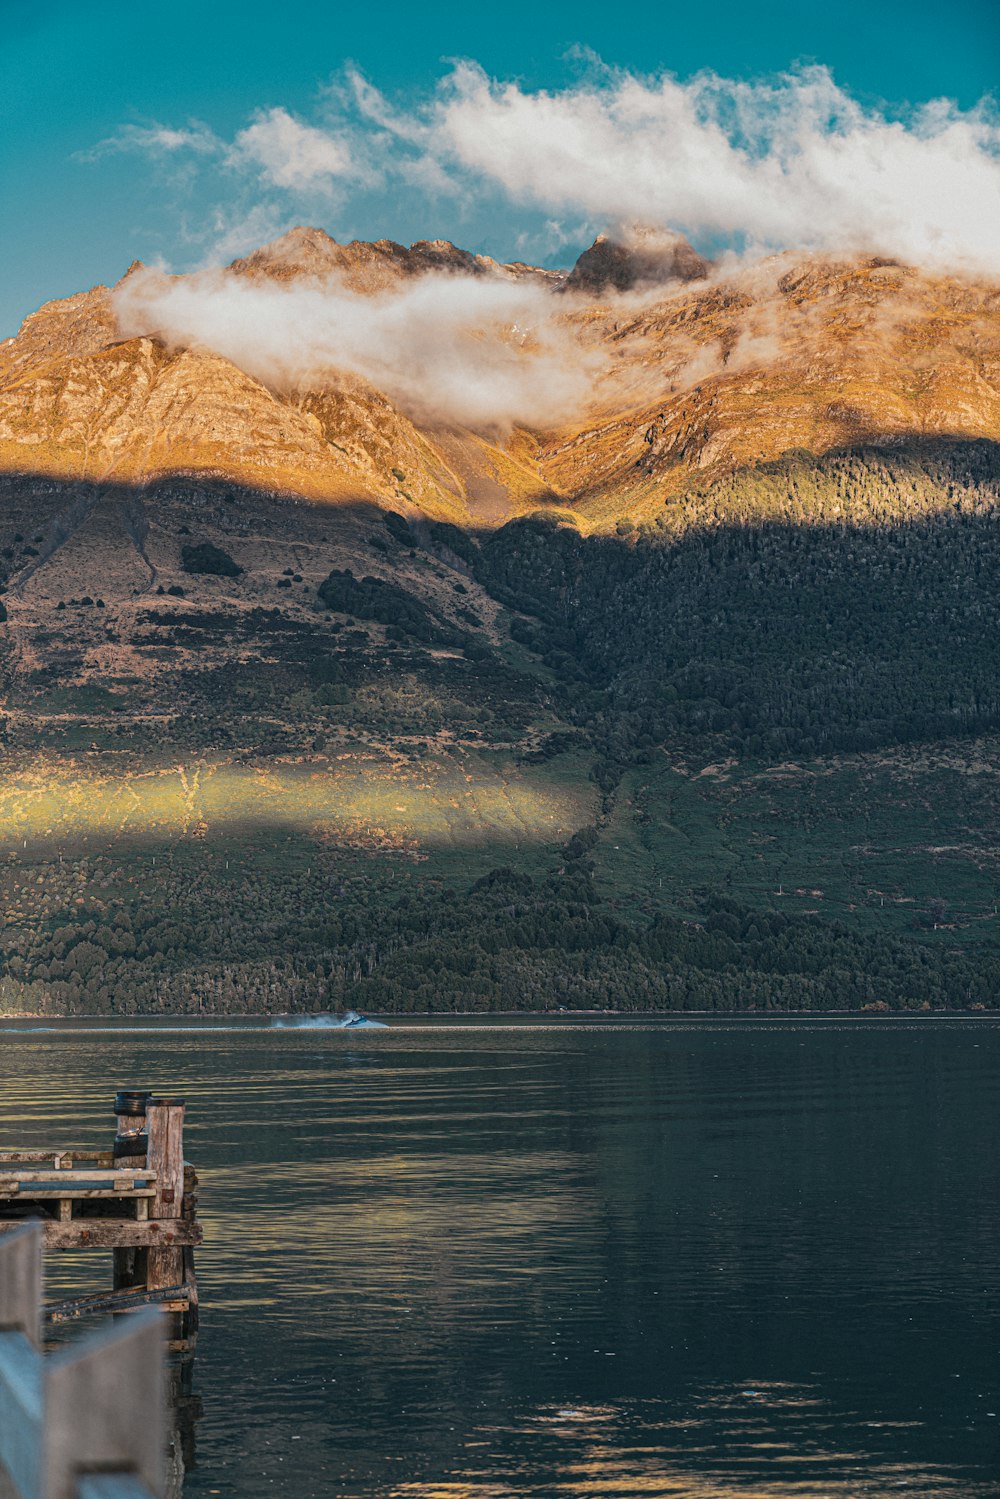 a lake with mountains in the background and a dock in the foreground